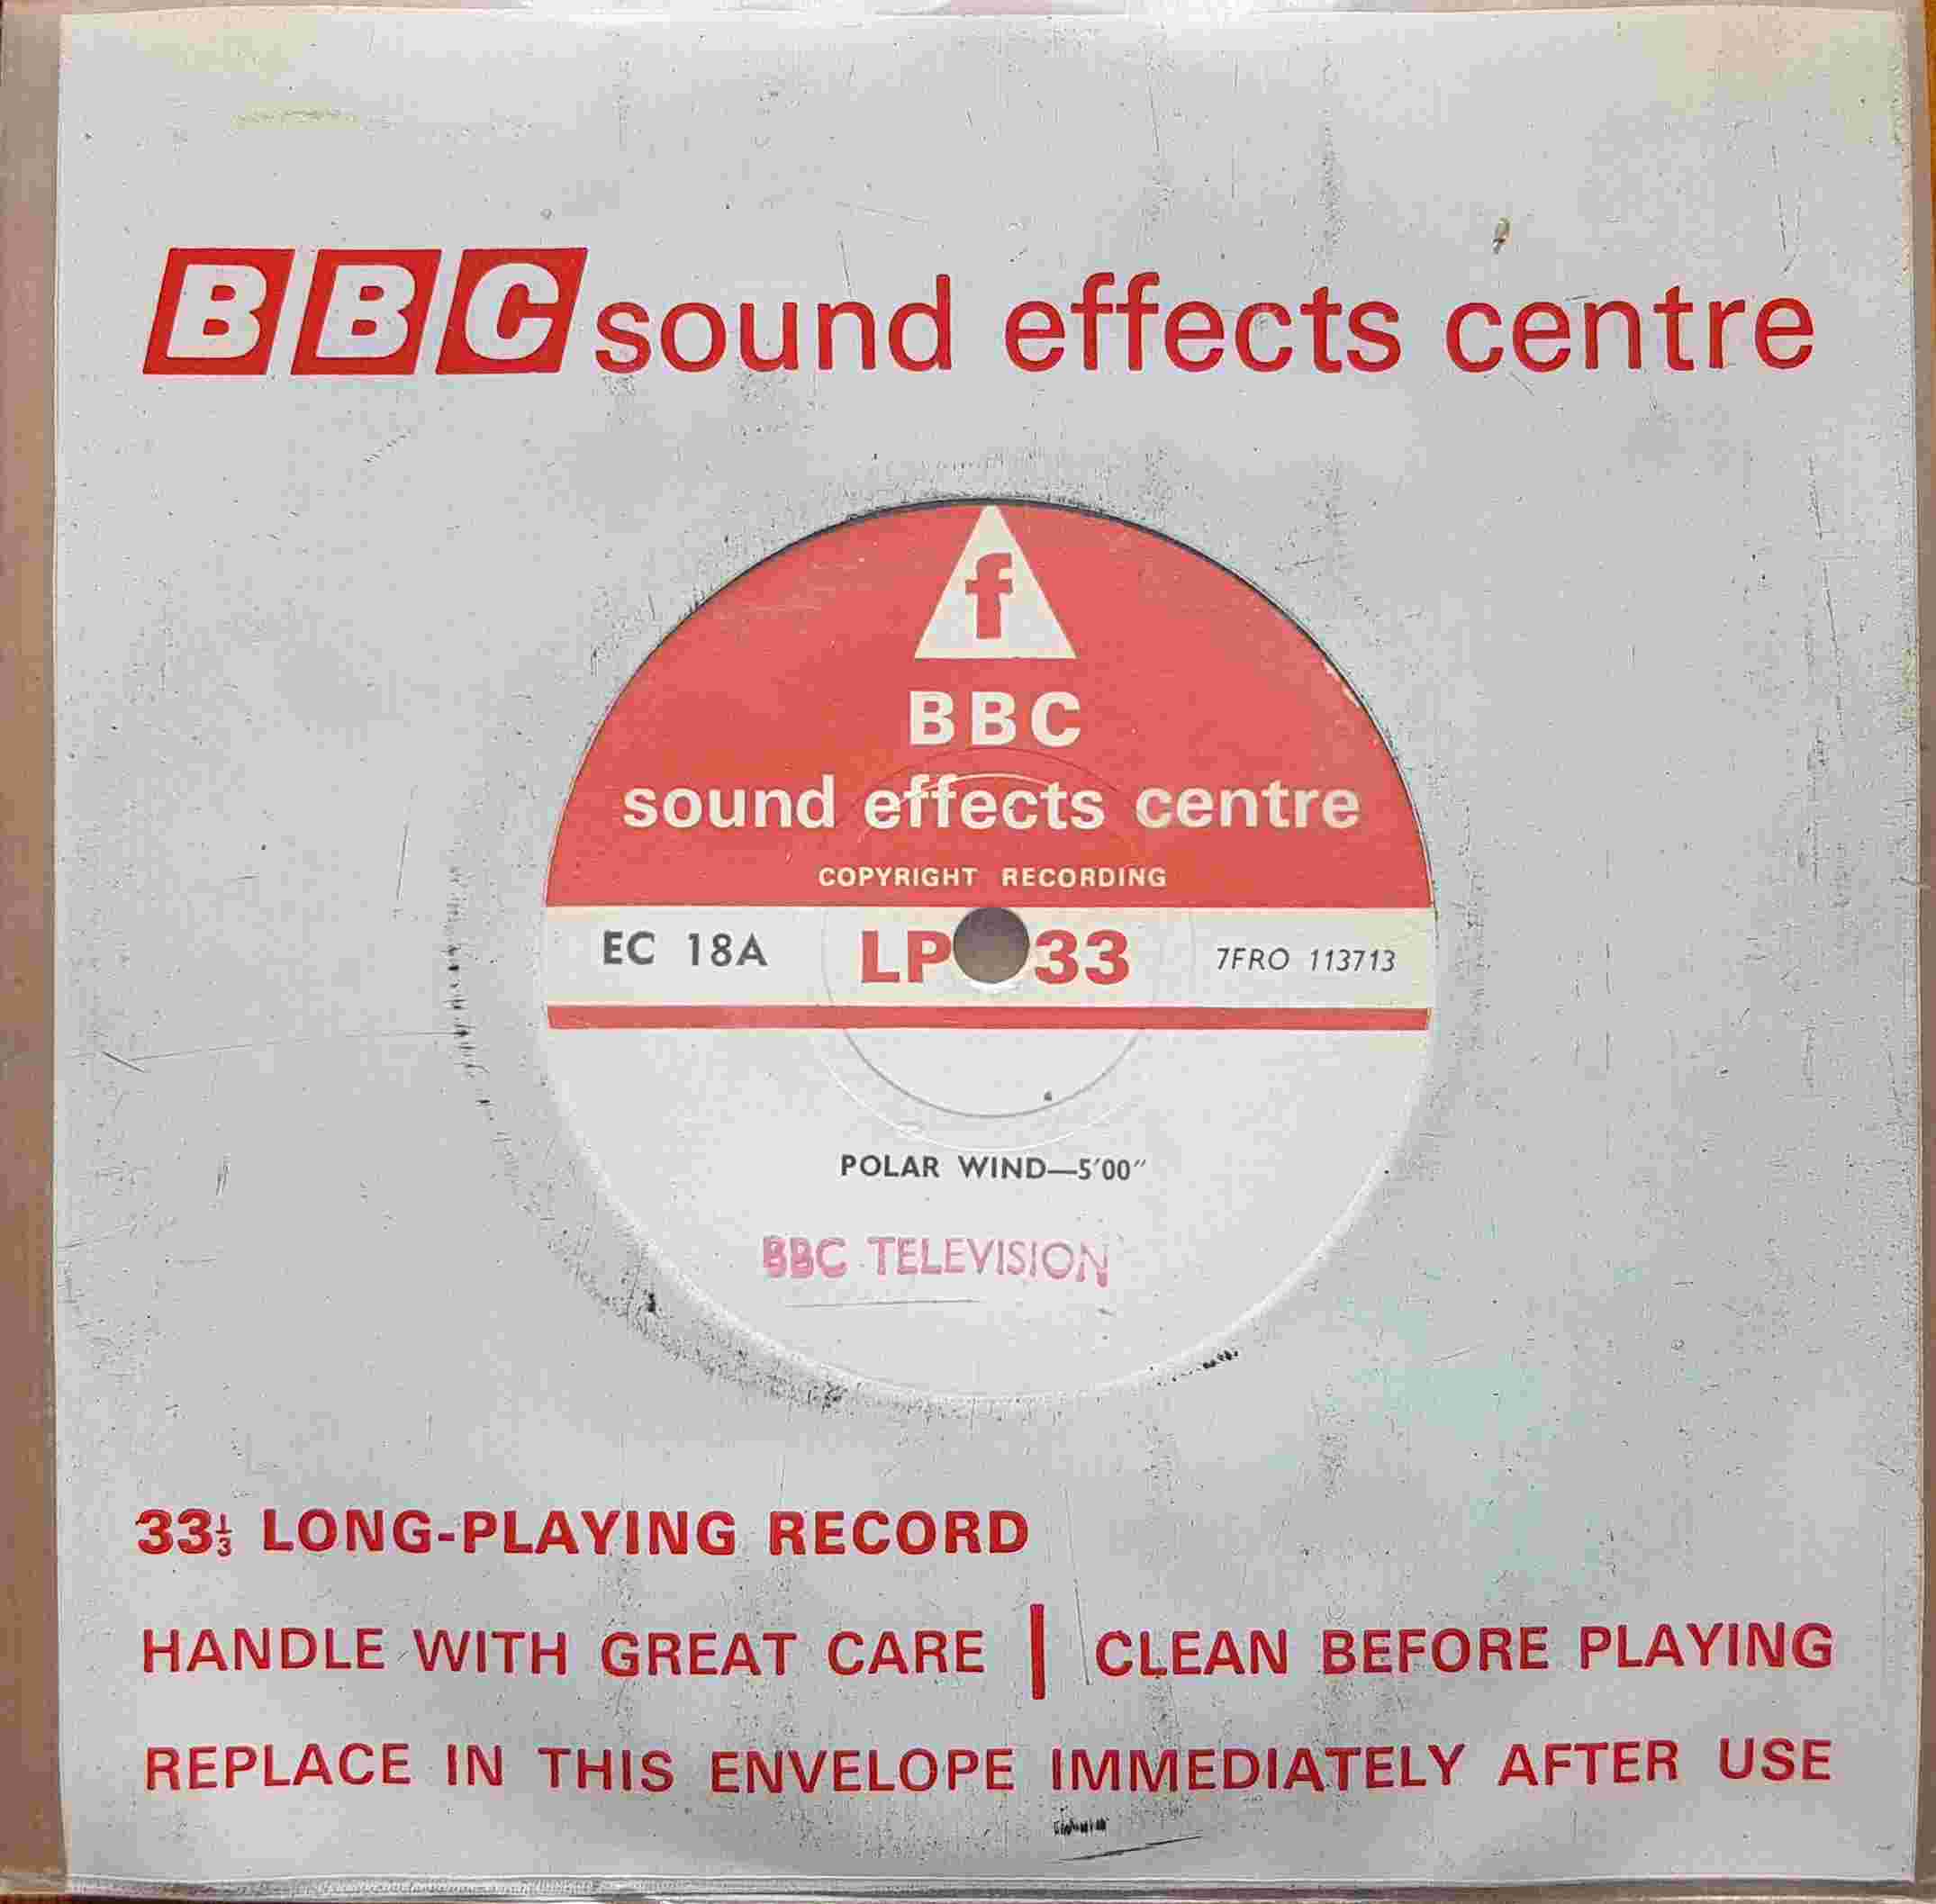 Picture of EC 18A Wind single by artist Not registered from the BBC records and Tapes library